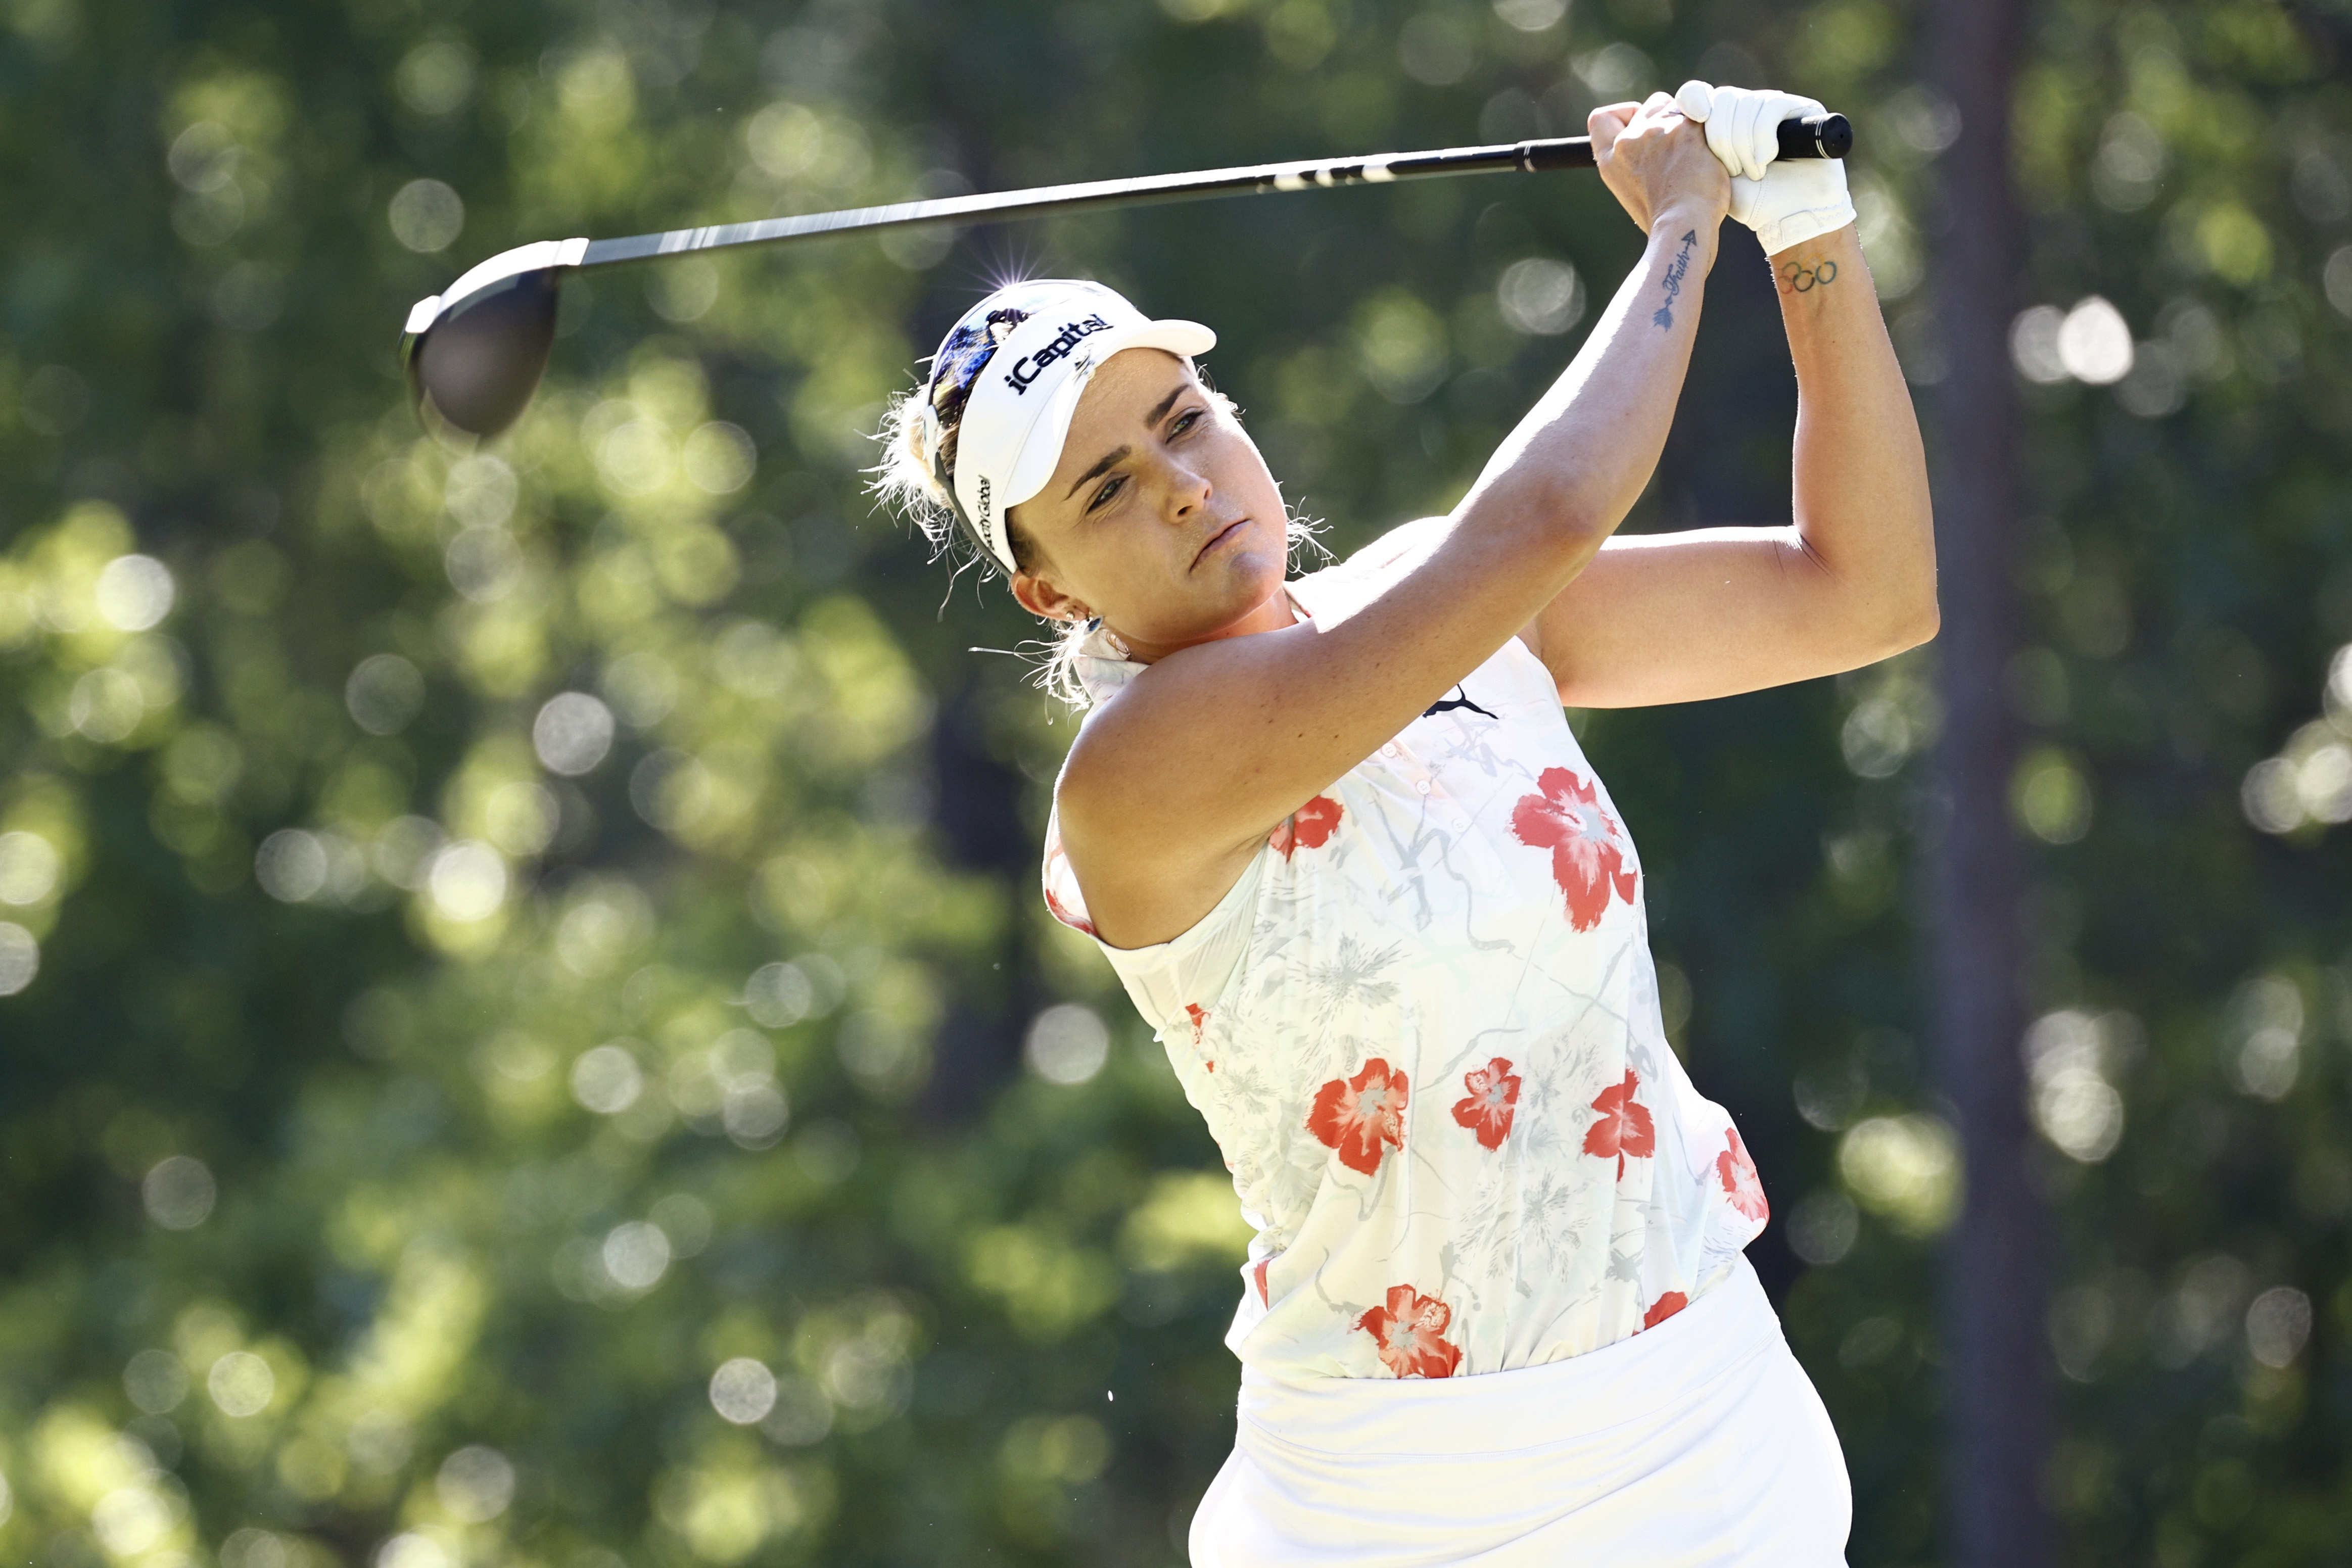 Our favorite outfits from the U.S. Women's Open so far